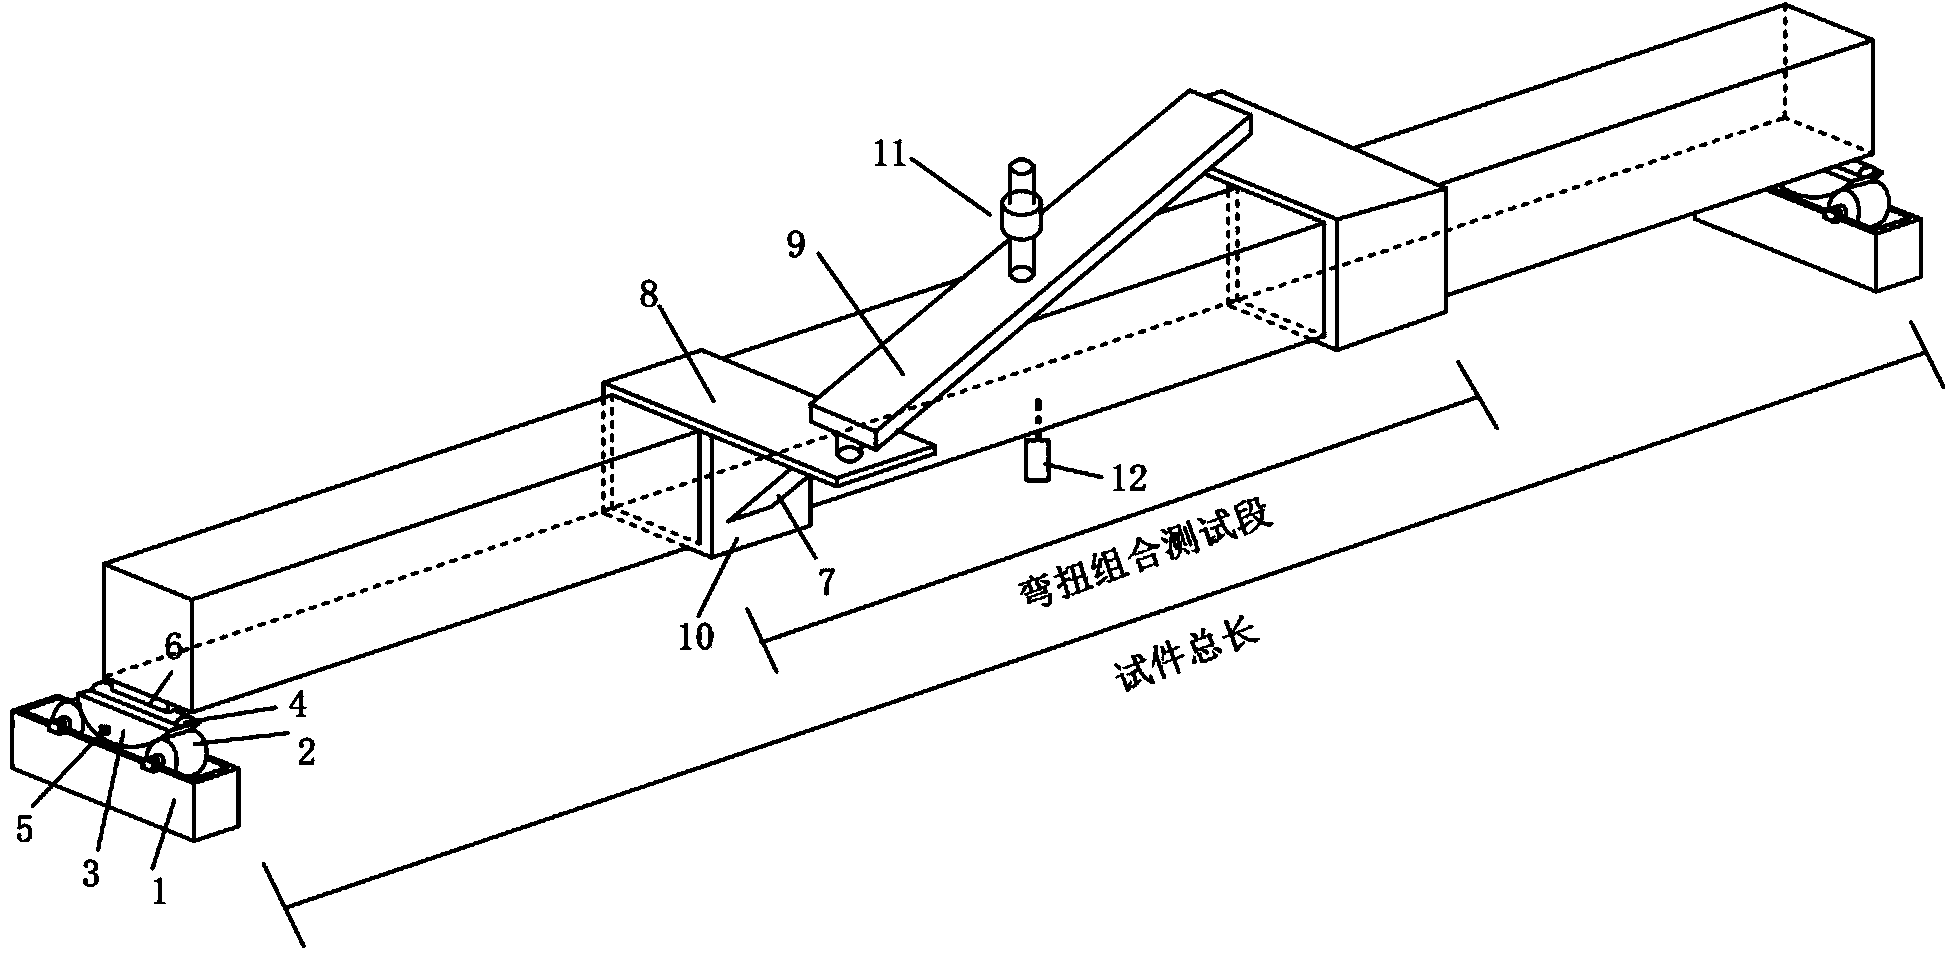 Beam component bending and torsion combined load test device and method